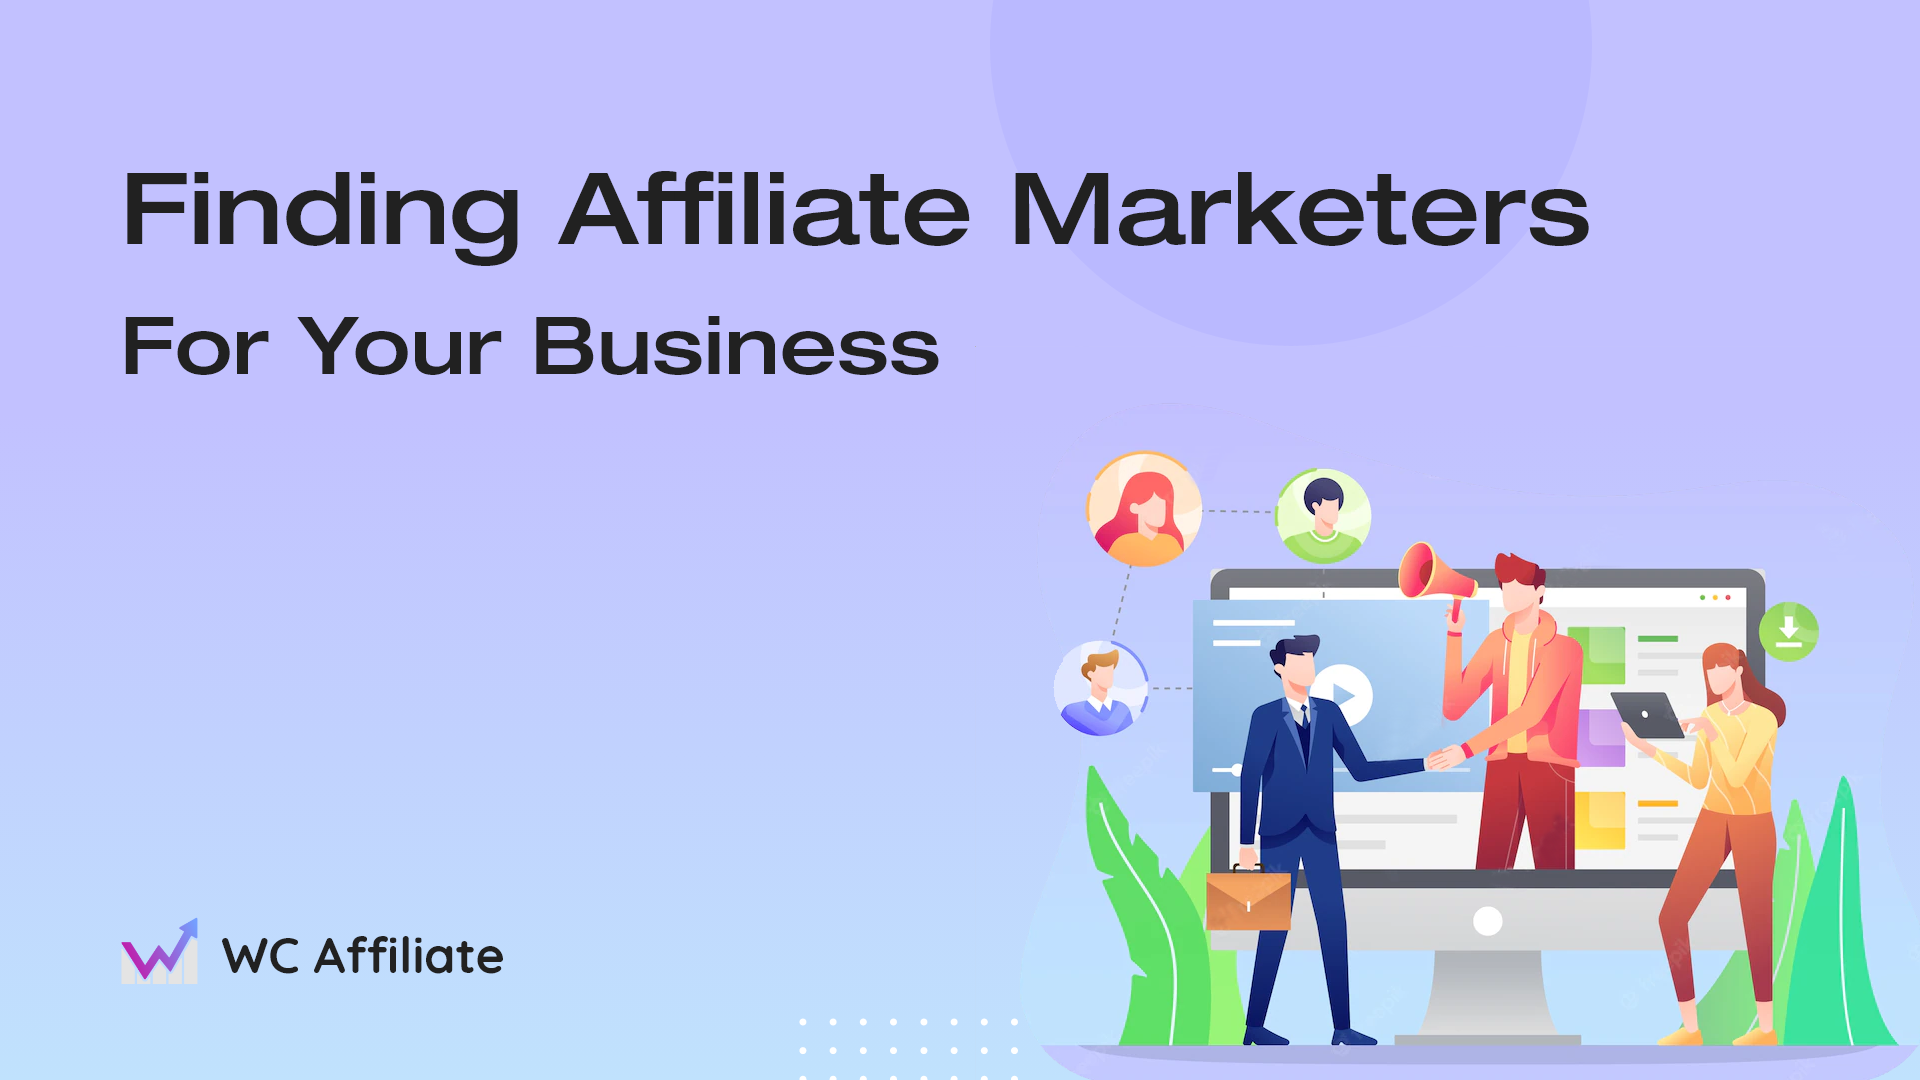 How to find affiliate marketers for your business